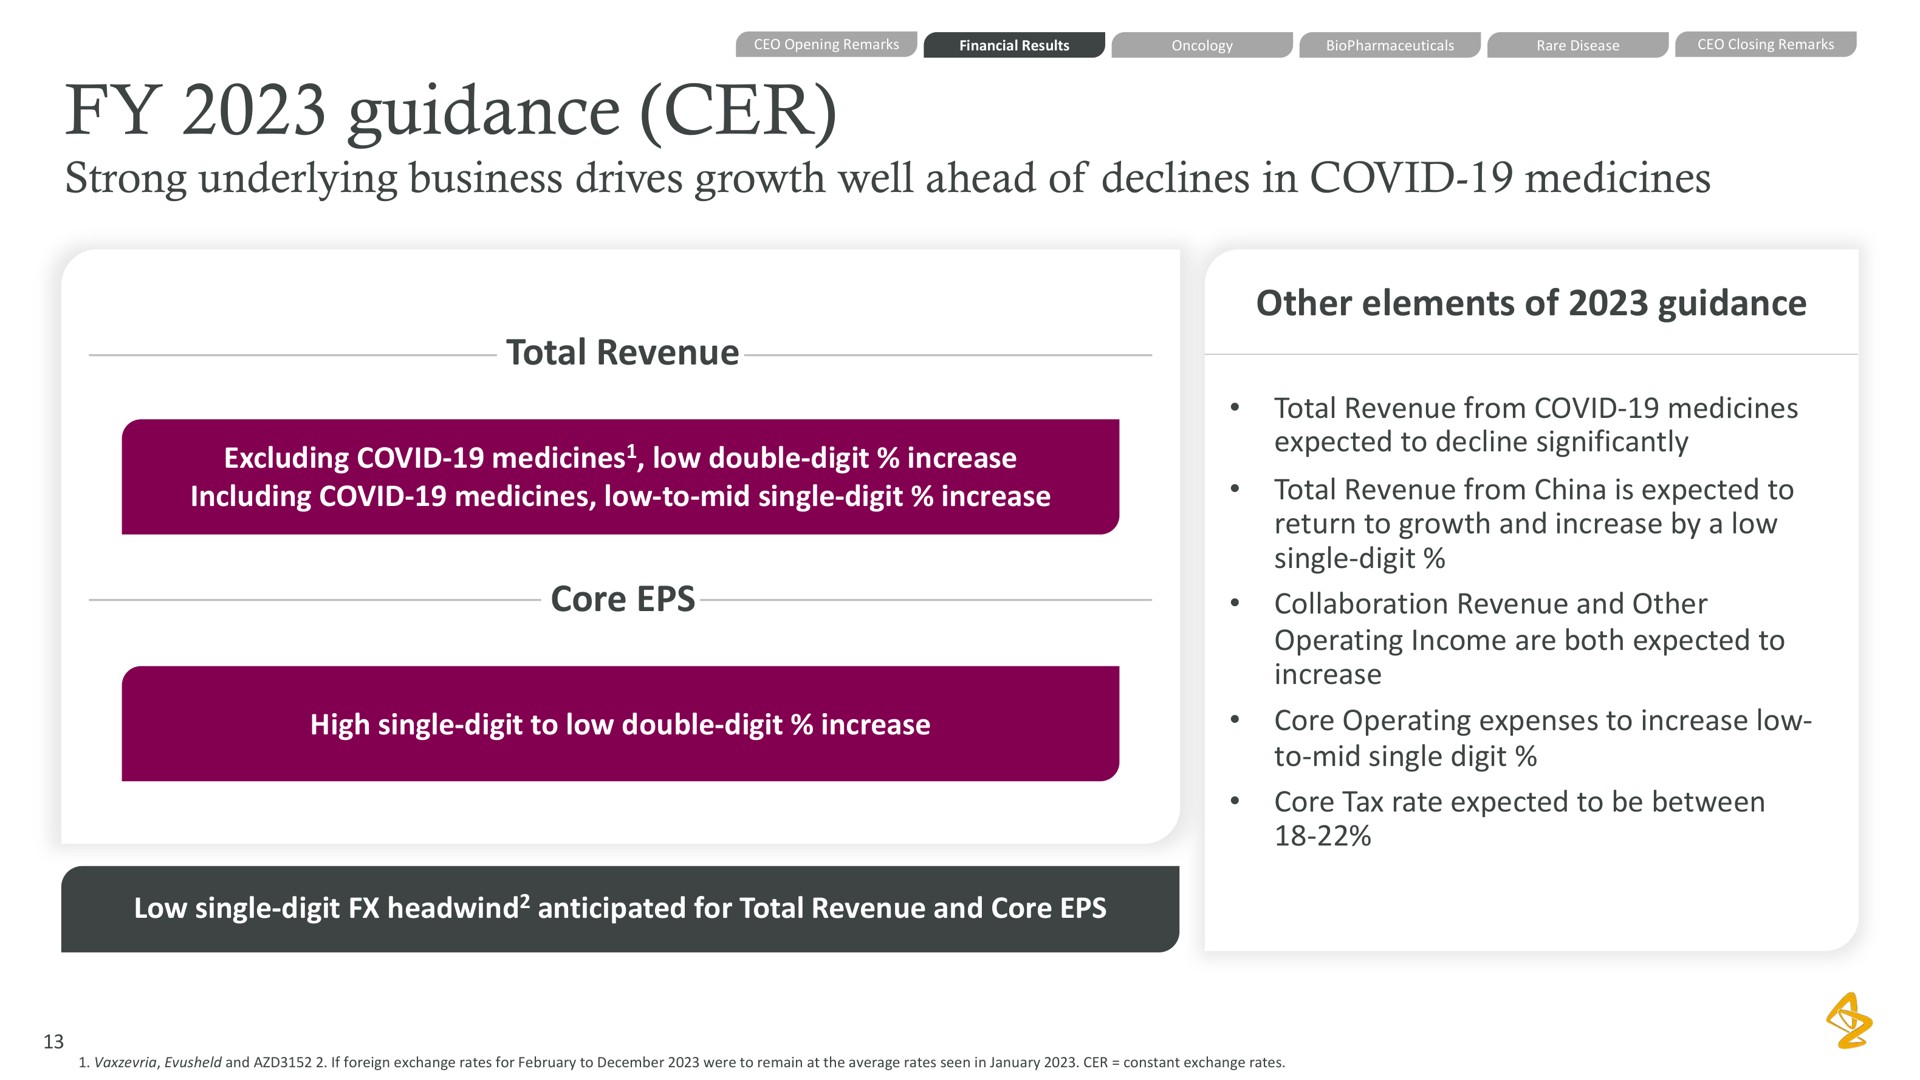 guidance strong underlying business drives growth well ahead of declines in covid medicines total revenue excluding covid medicines low double digit increase including covid medicines low to mid single digit increase core high single digit to low double digit increase other elements of guidance total revenue from covid medicines expected to decline significantly total revenue from china is expected to return to growth and increase by a low single digit collaboration revenue and other operating income are both expected to increase core operating expenses to increase low to mid single digit core tax rate expected to be between low single digit anticipated for total revenue and core | AstraZeneca